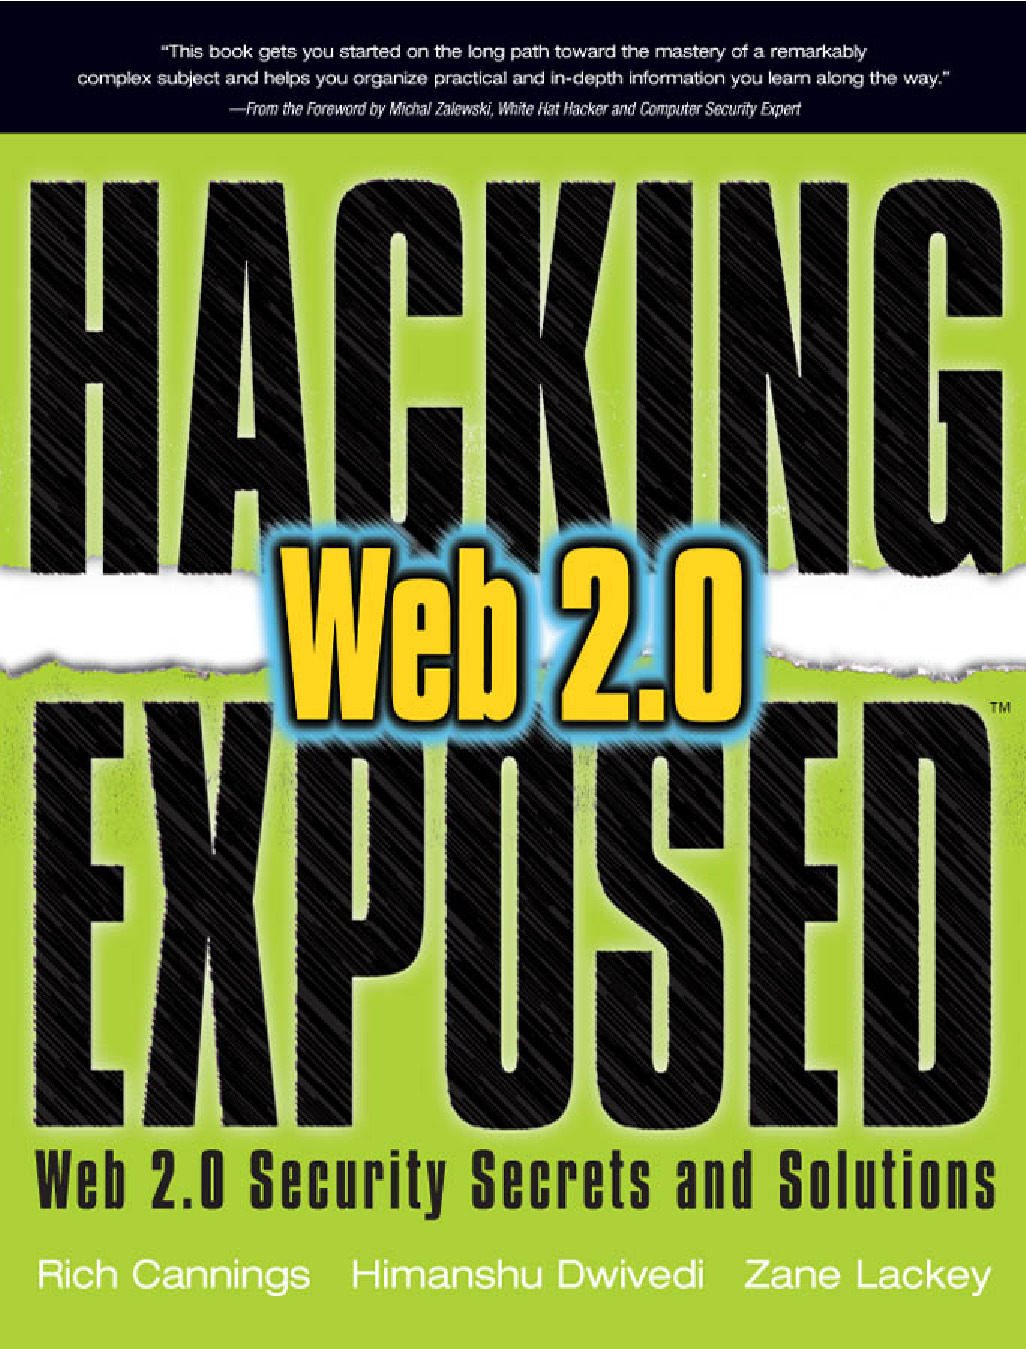 Hacking Exposed – Web 2.0